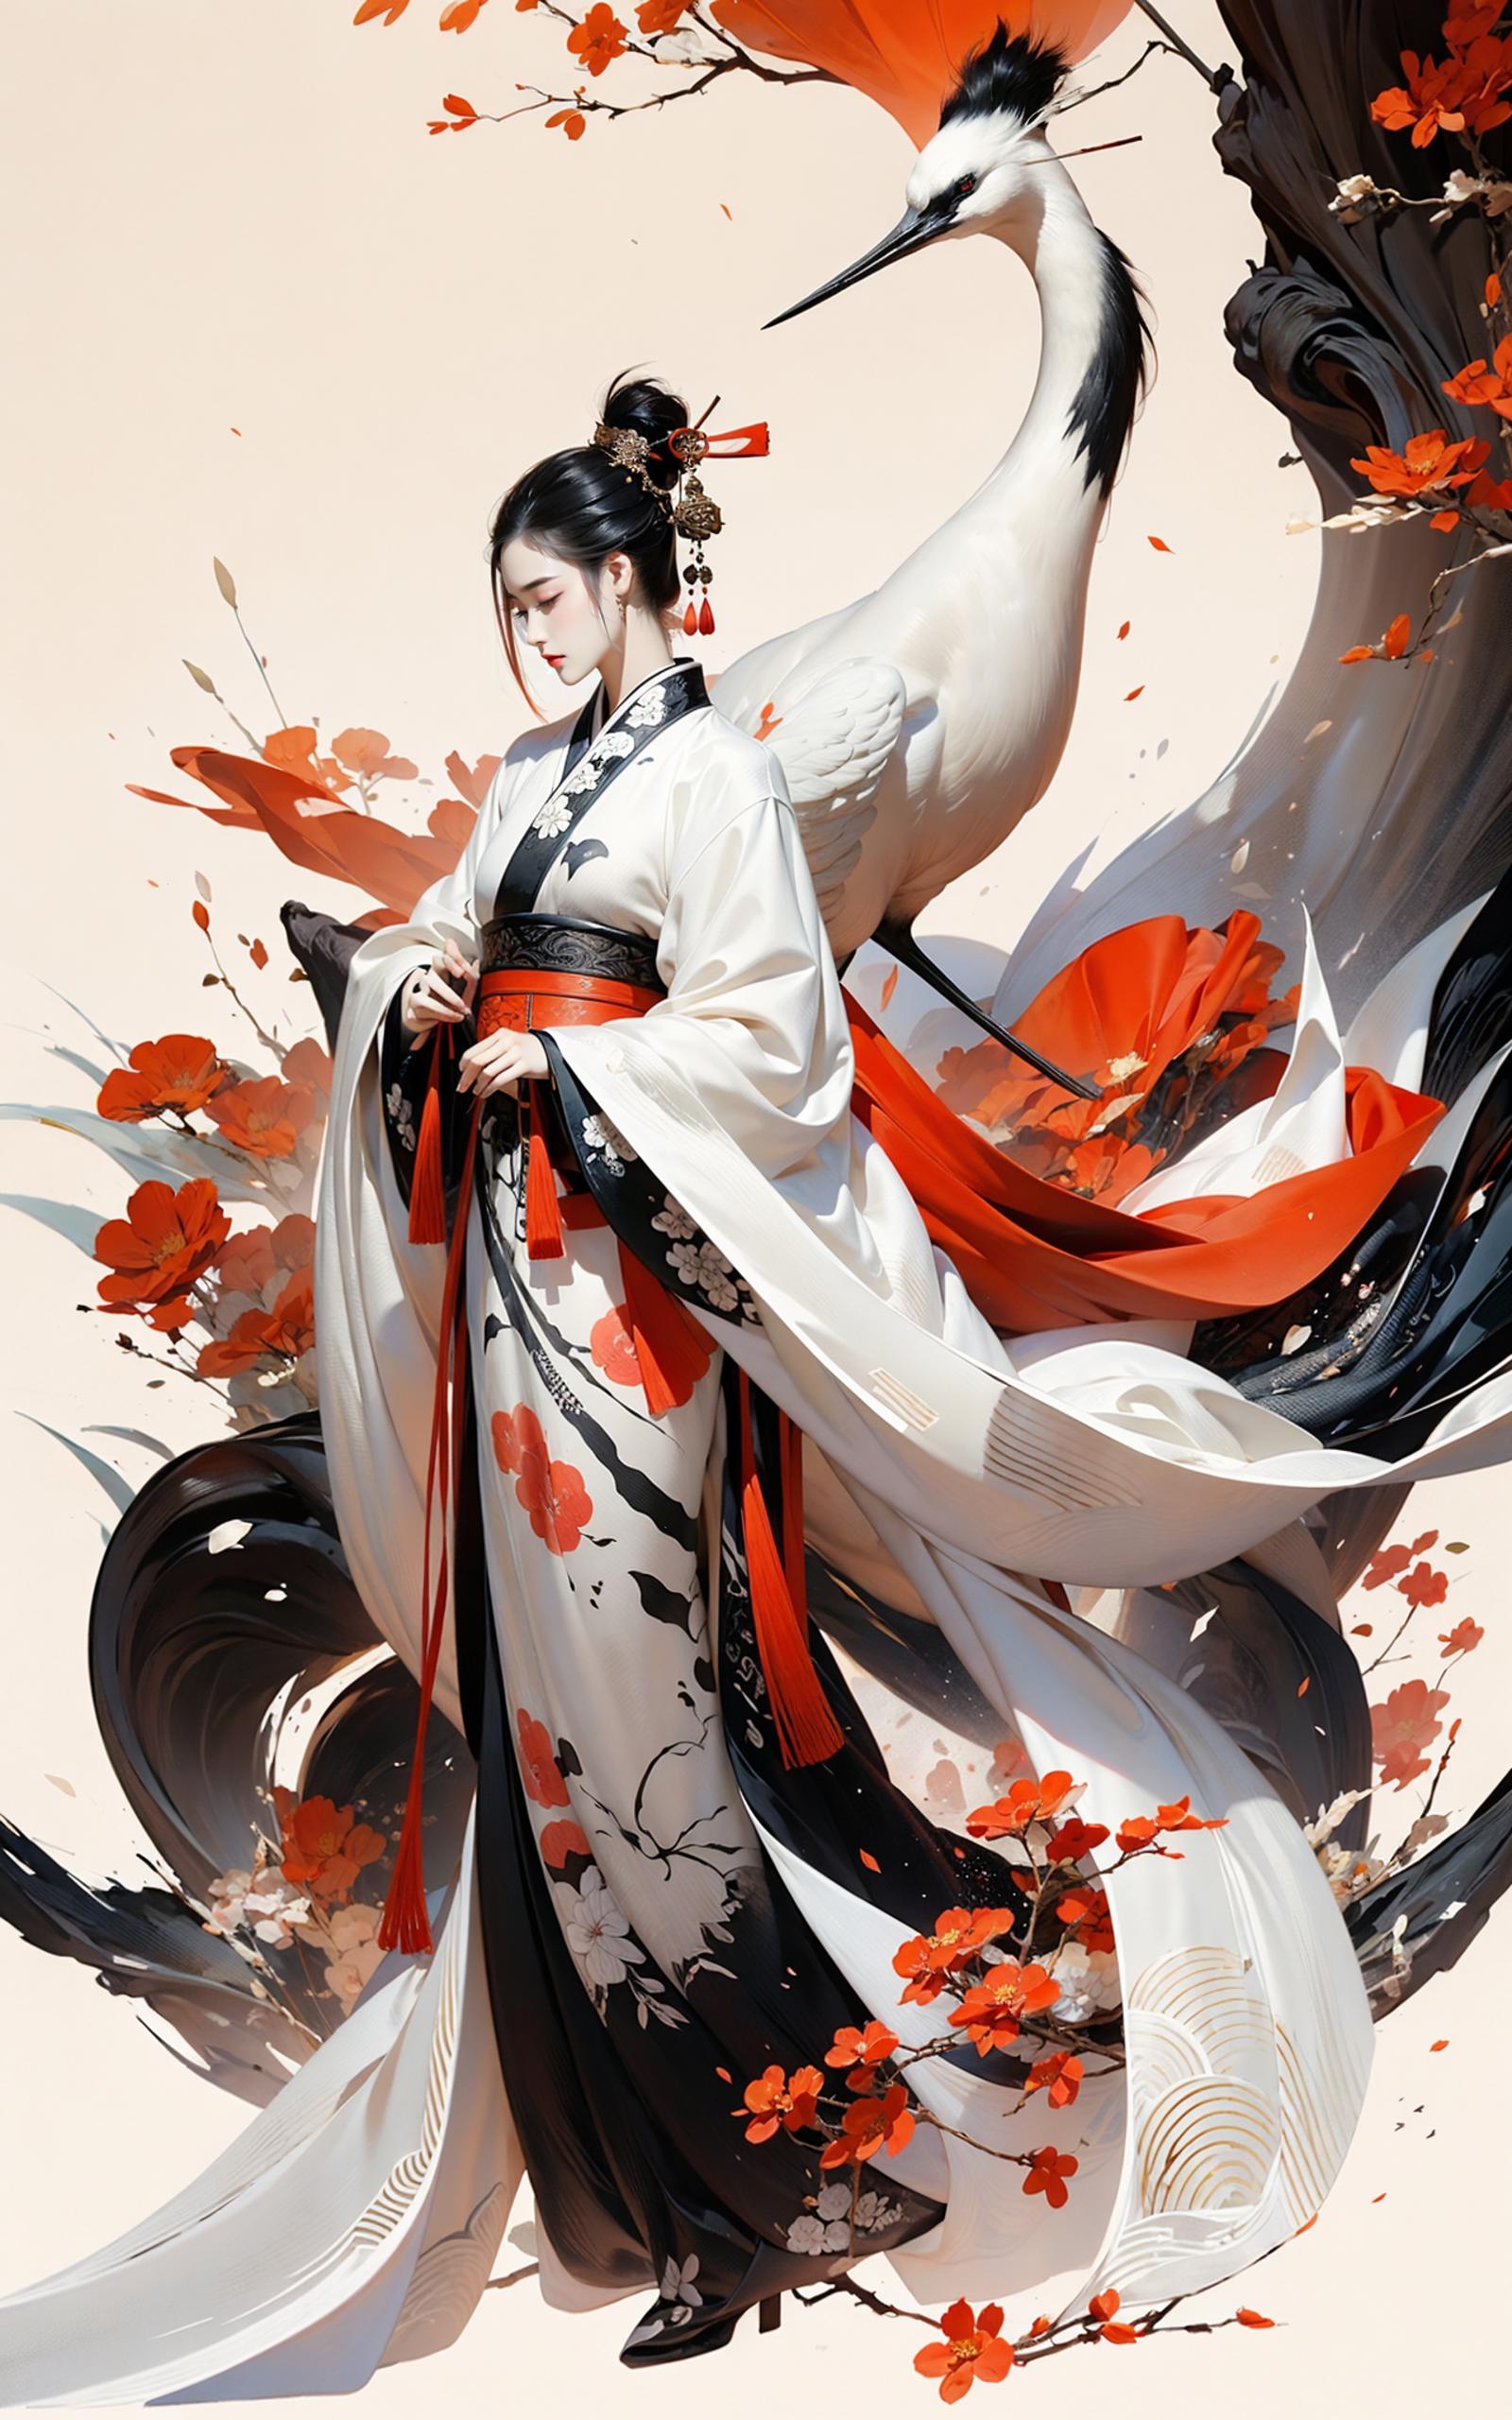 A beautifully drawn Asian woman with a white dress and red accents, surrounded by flowers and a bird.